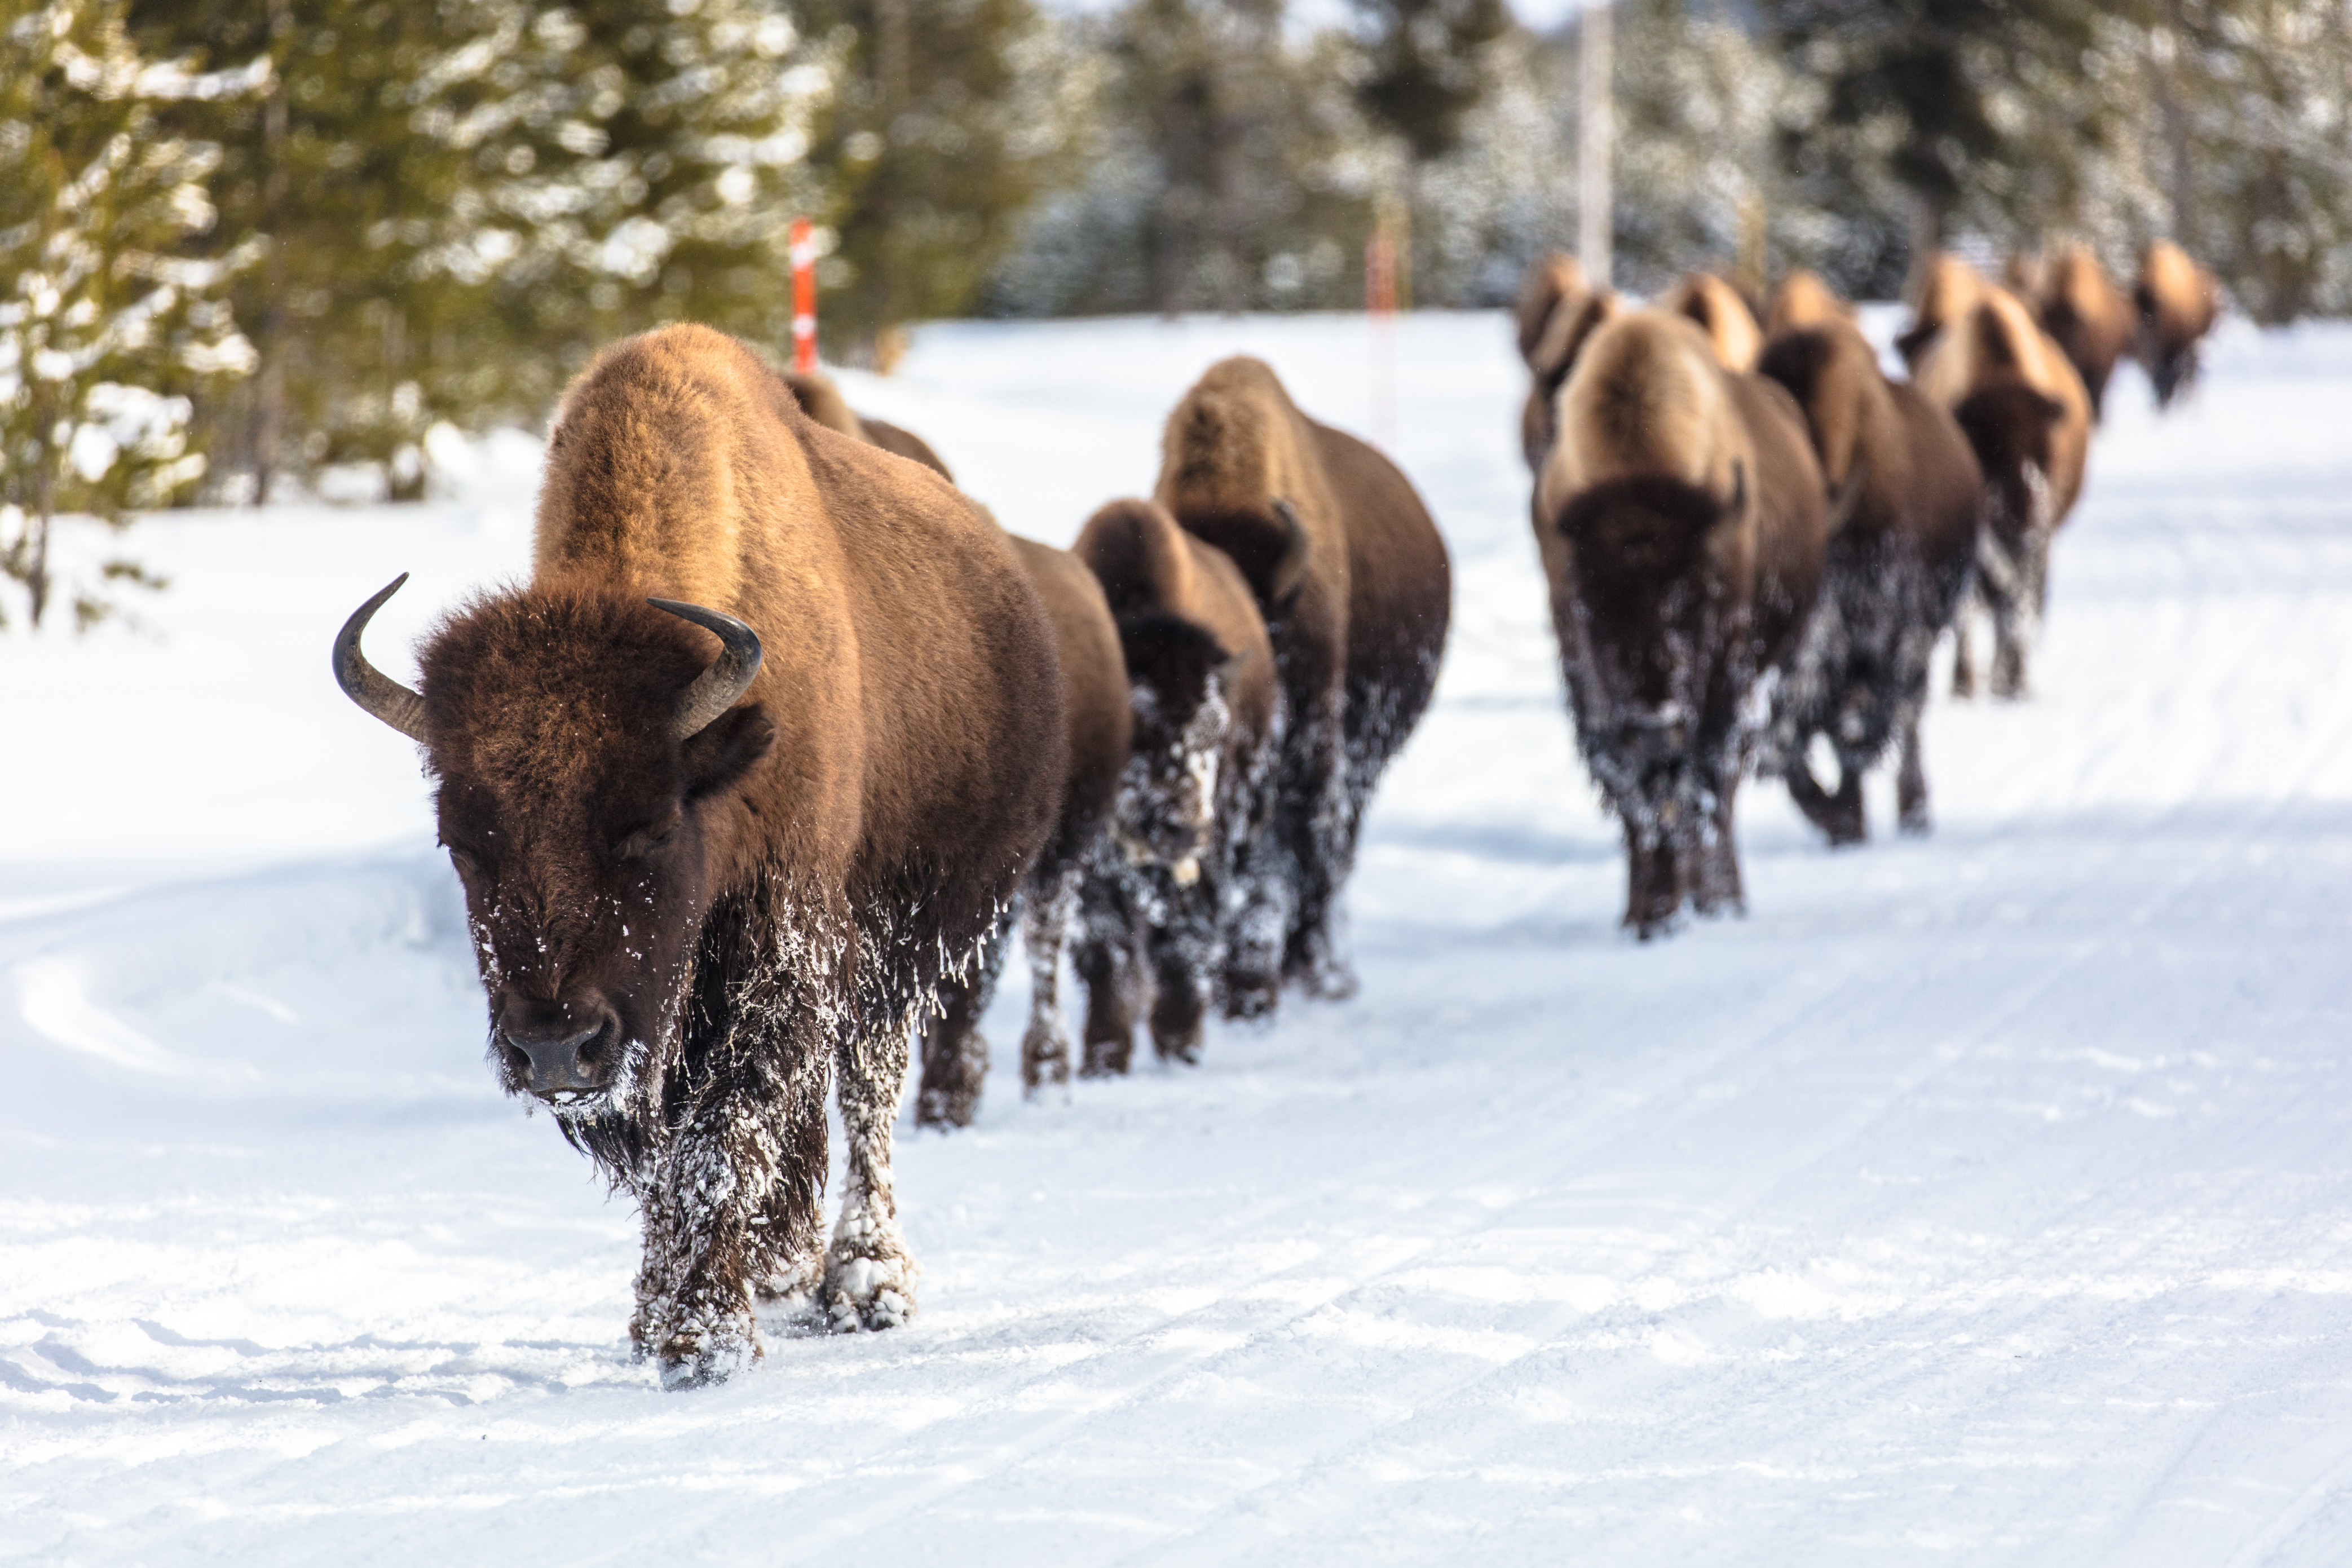 Bison walk in a line on the snow covered road